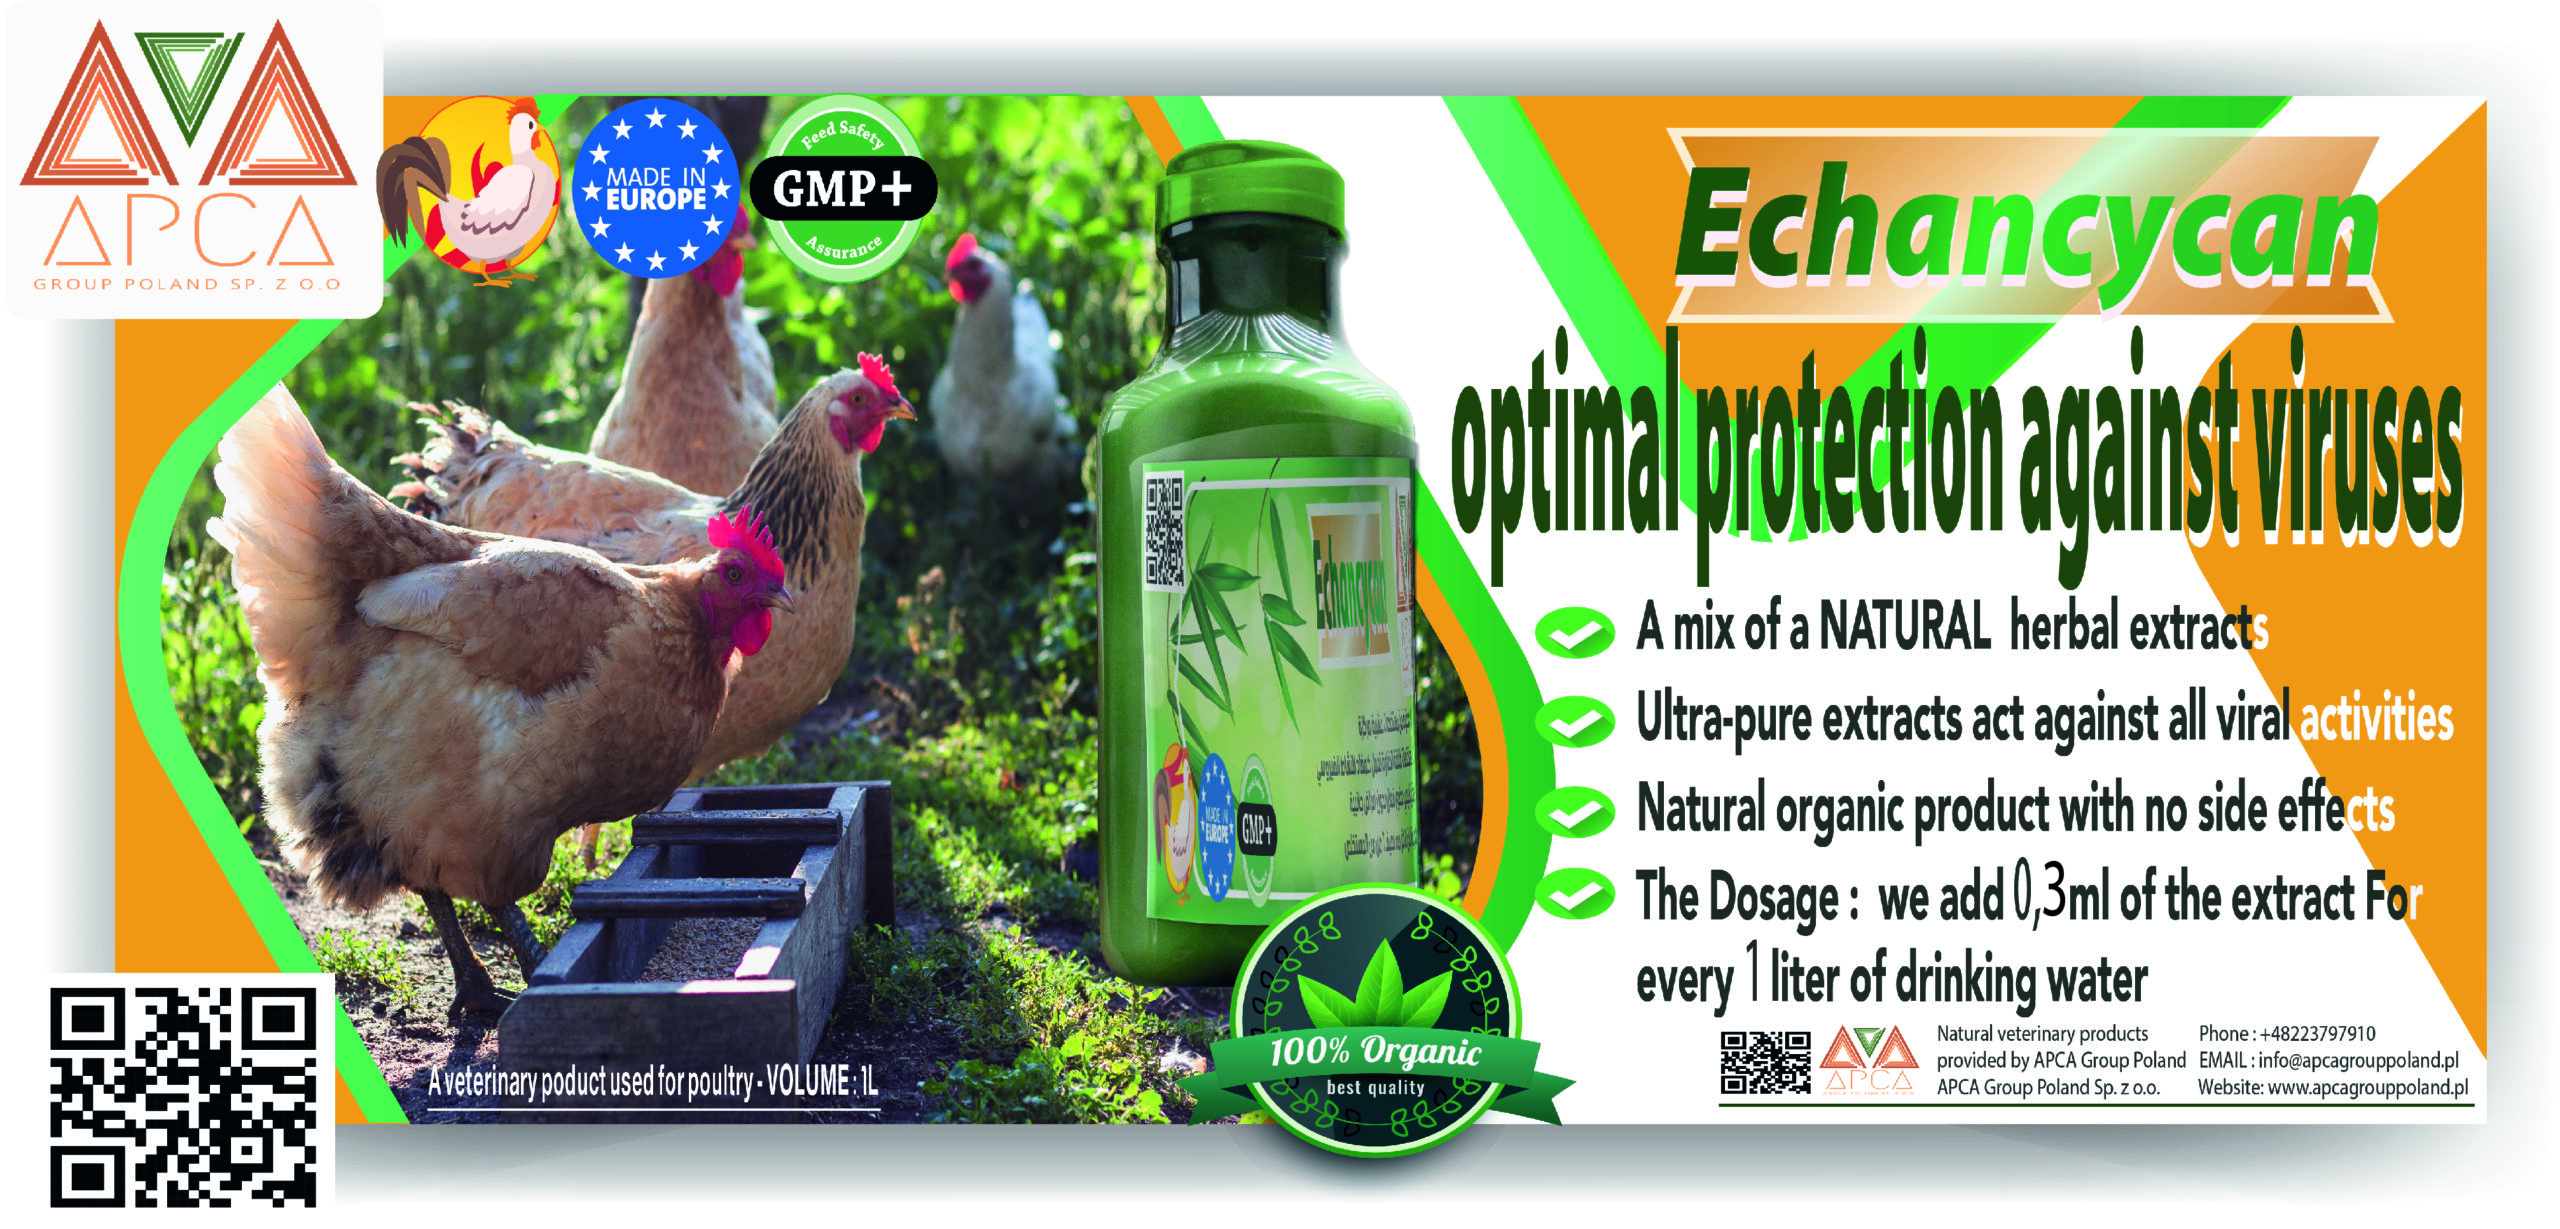 apca group poland -- export veterinary products -- echancycan